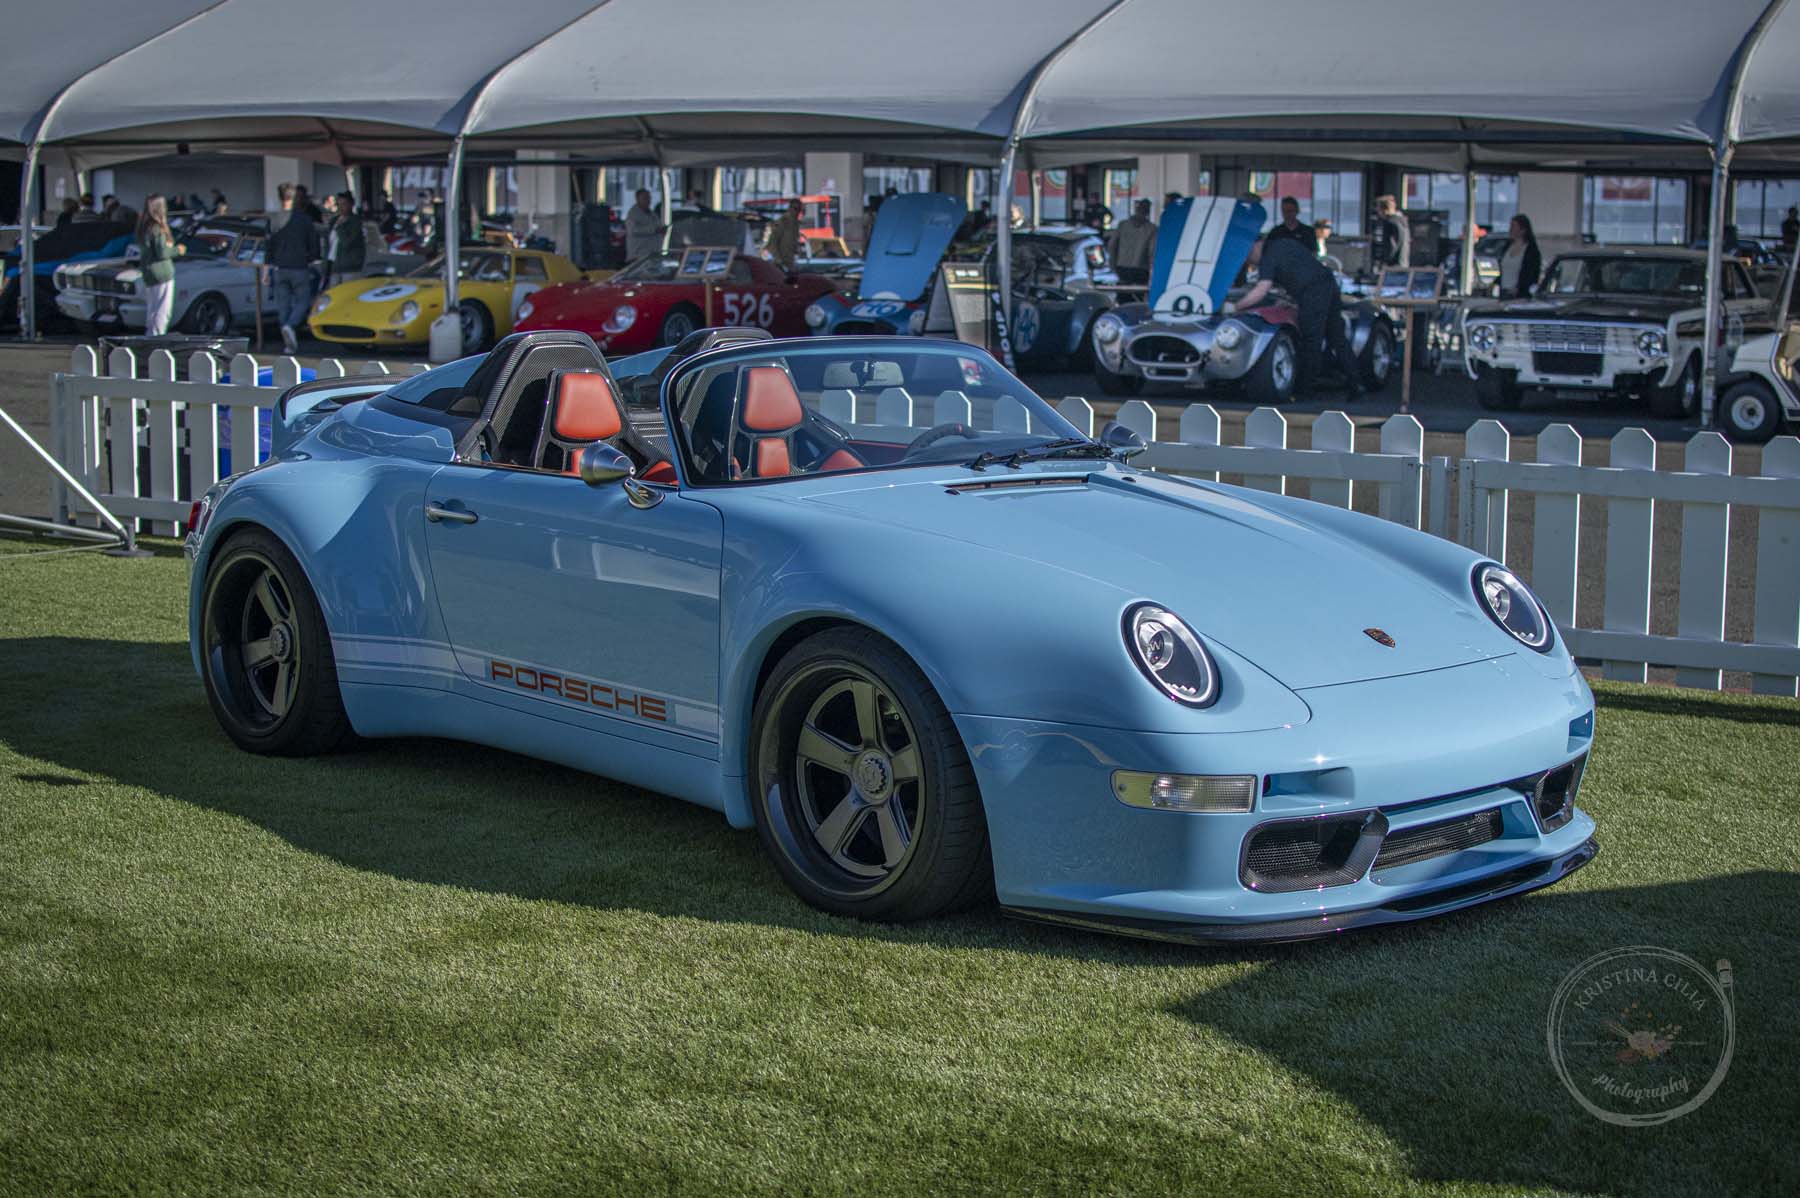 This Porsche 911 Speedster by Gunther Werks is a stark contrast to the older racercars lined up behind it in the paddock